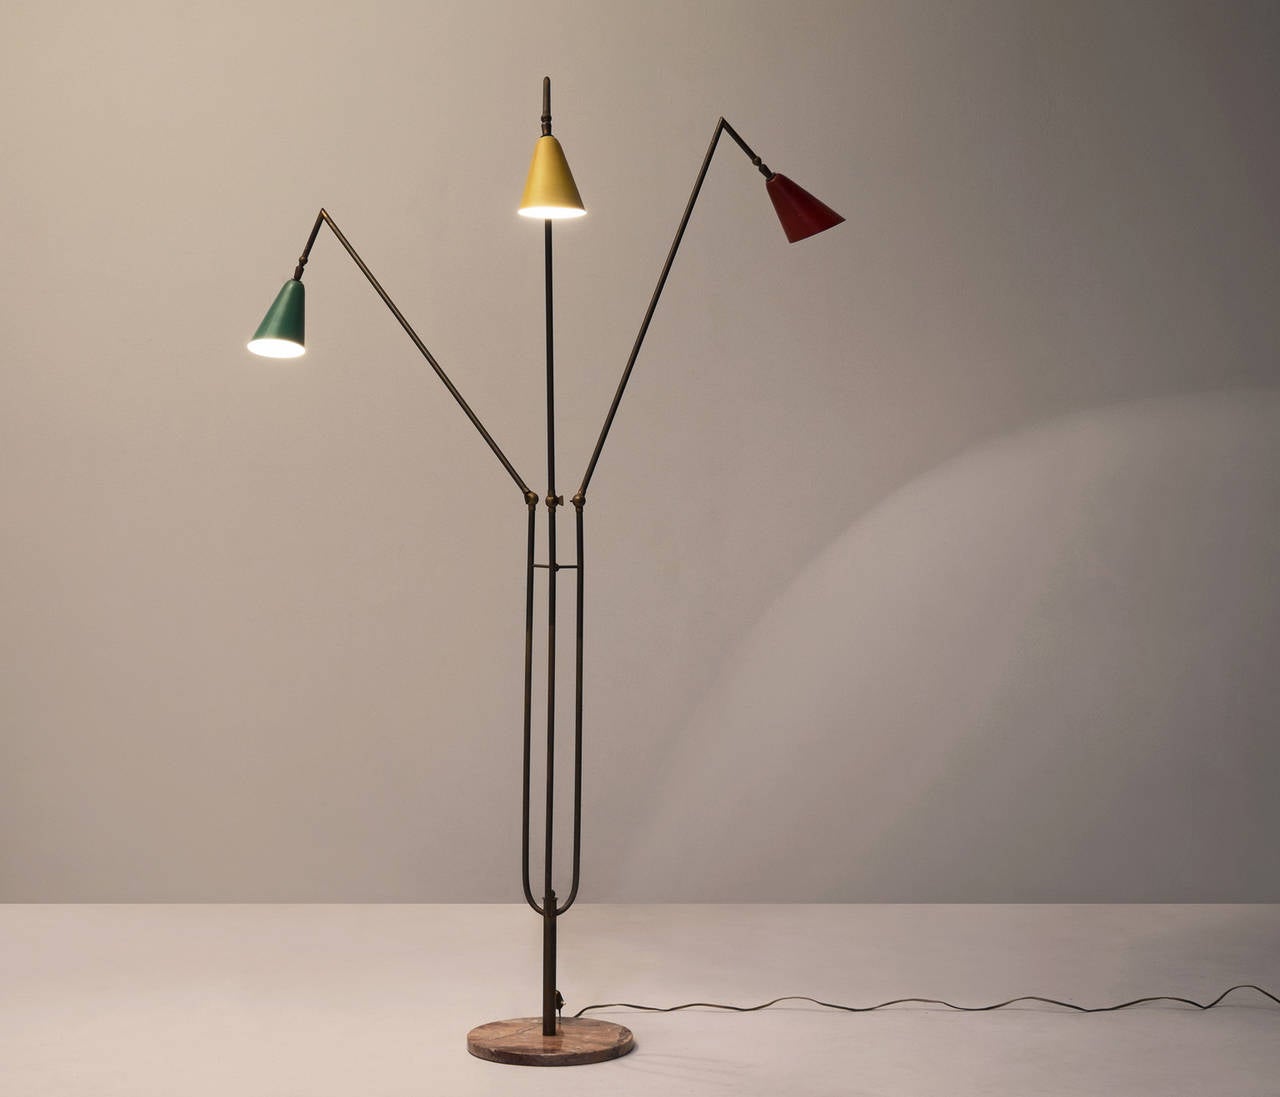 Italian floor lamp with colored shades, 1950s.

The three metal shades painted in yellow, green and red are adjustable to almost every position. The brass arms and joints together with the round marble base provides a highly decorative